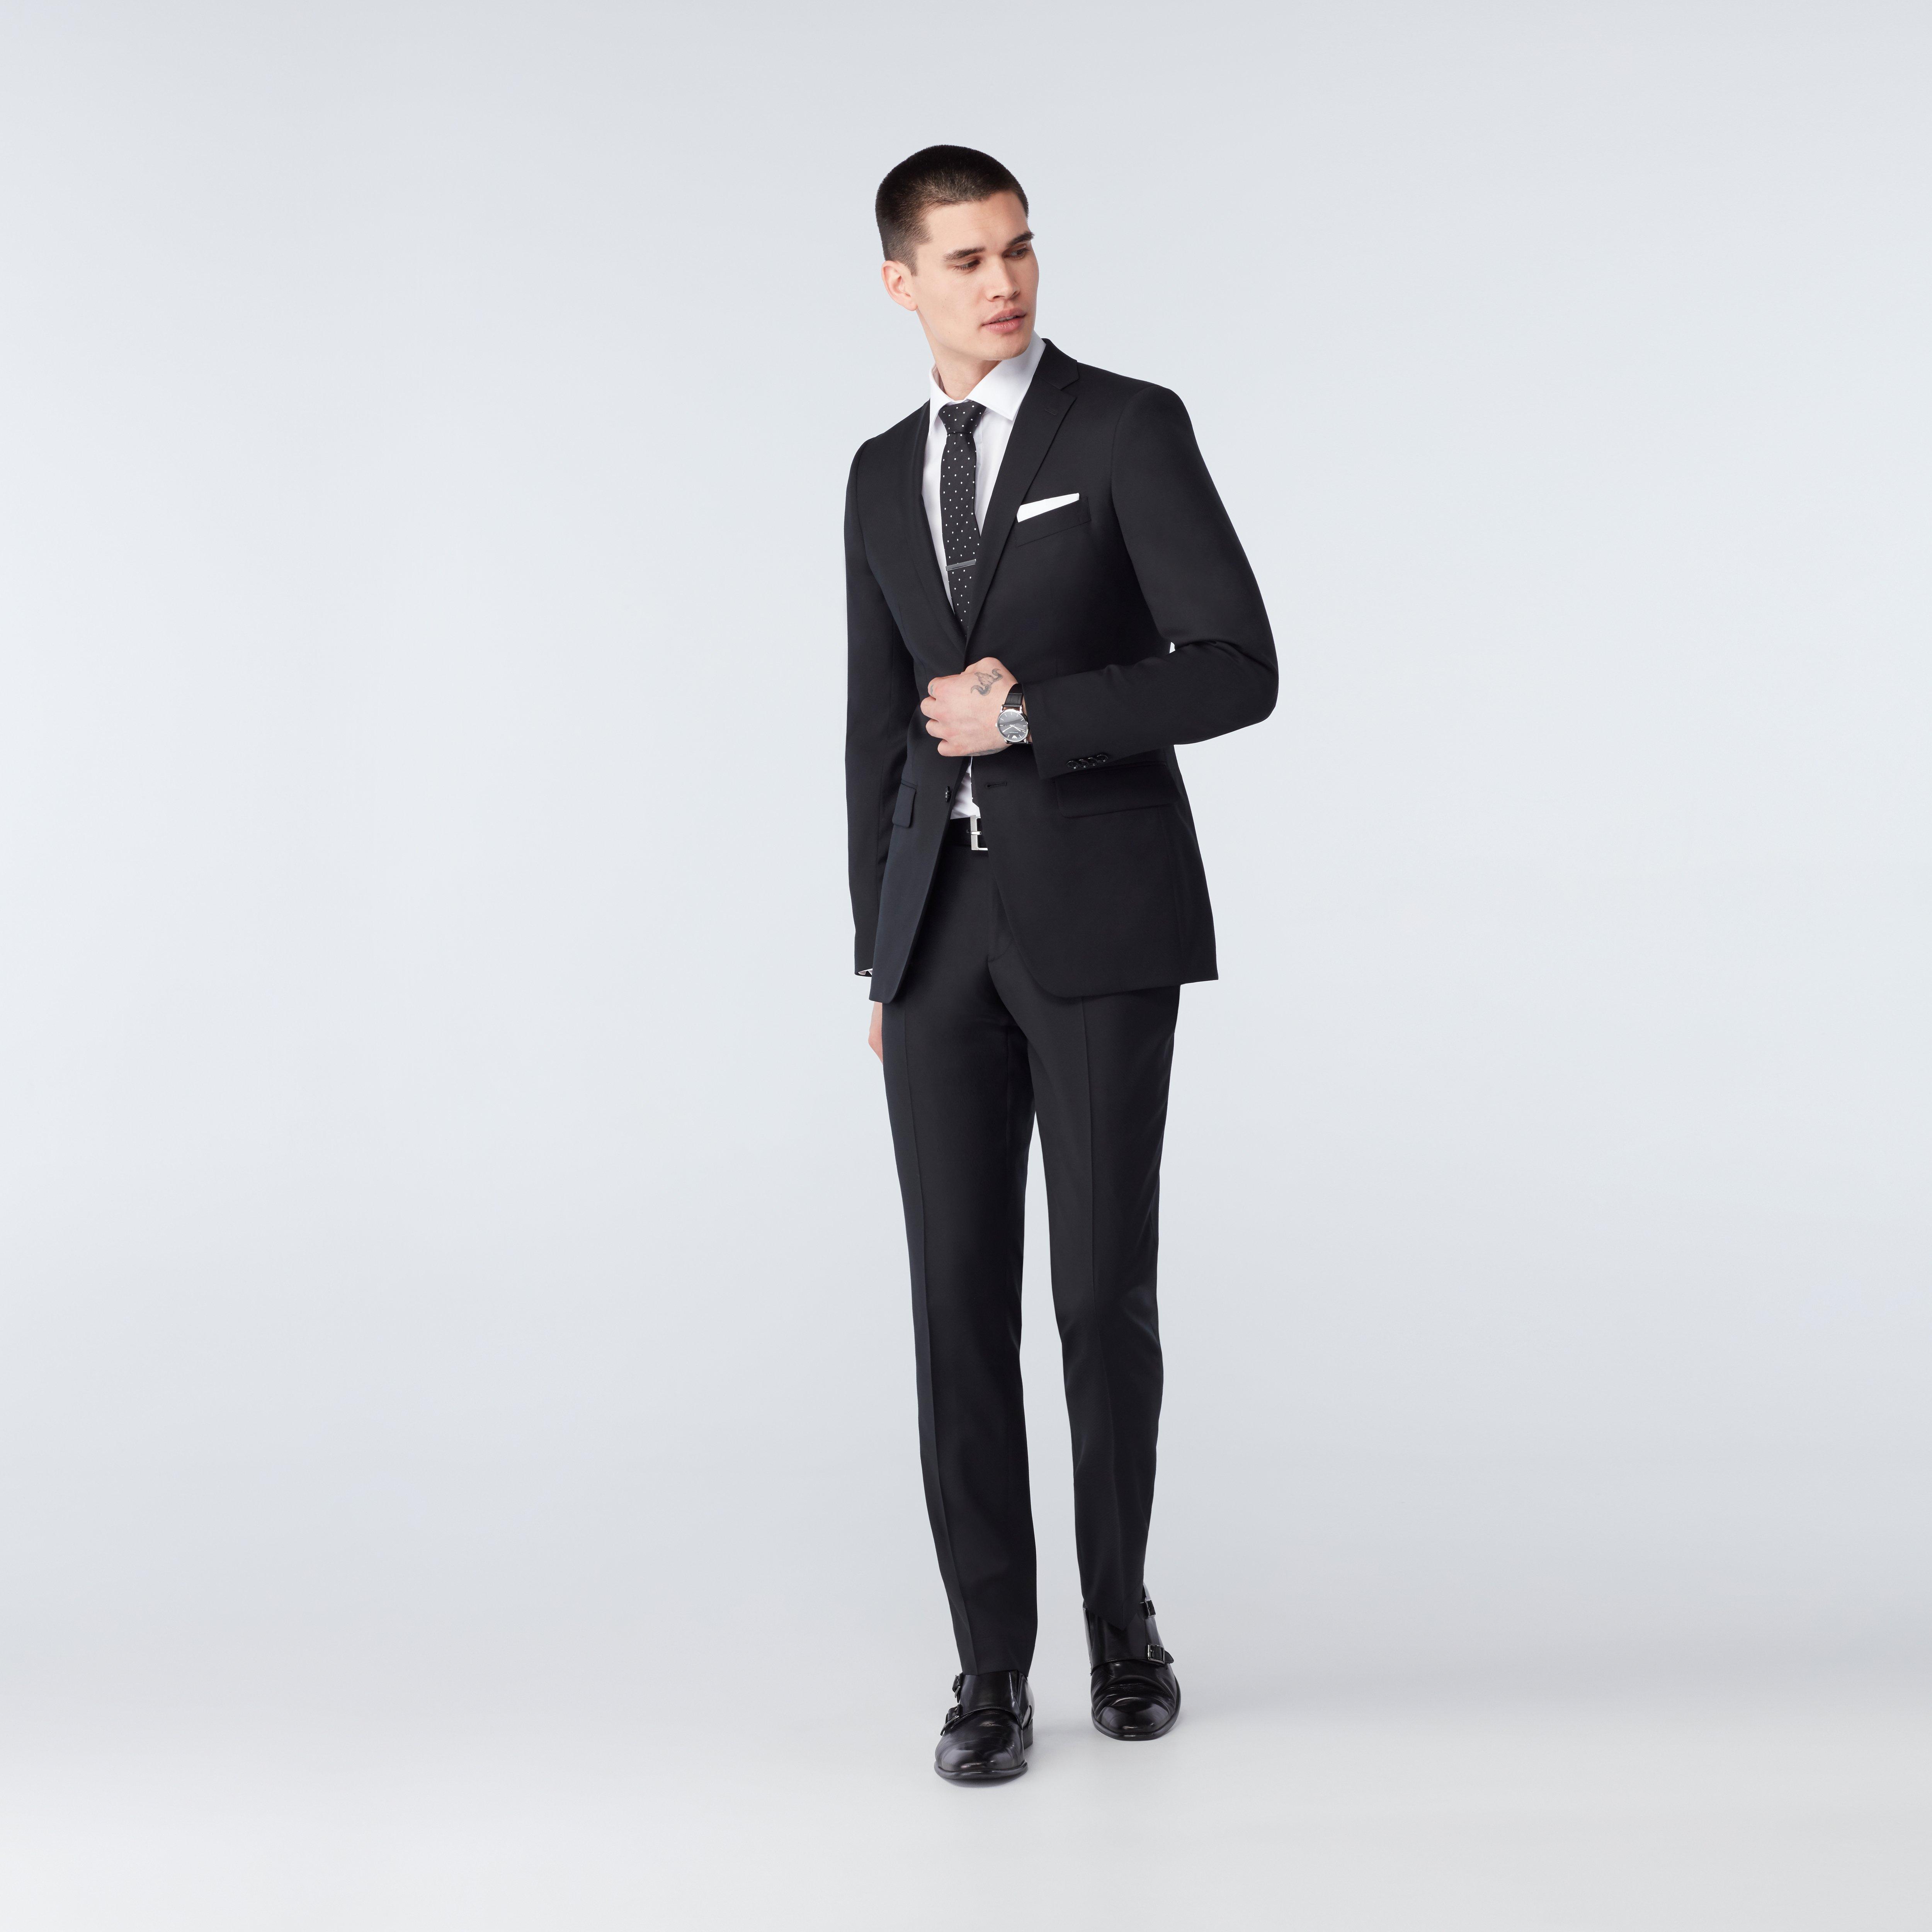 The best black blazers to suit all formal occasions